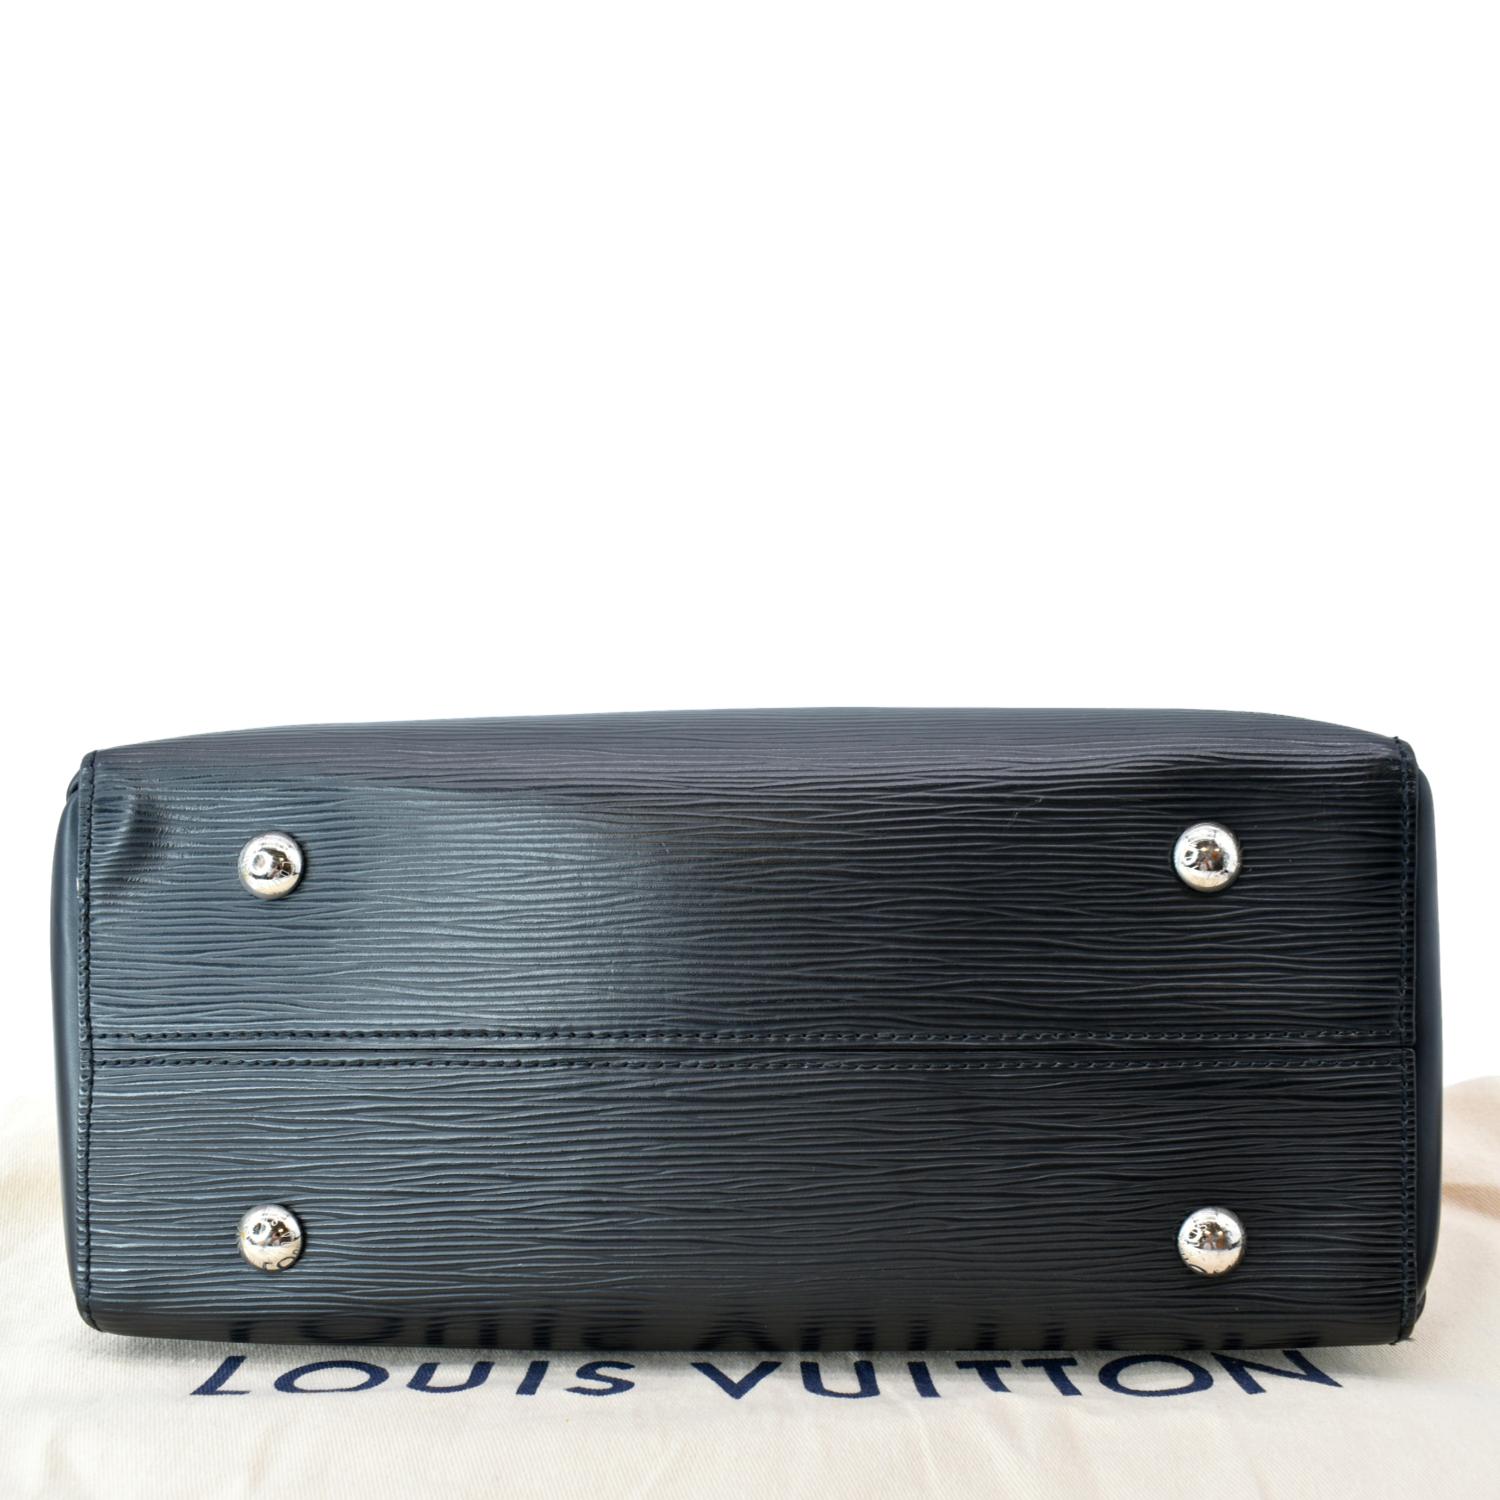 Grenelle Mm Louis Vuitton - For Sale on 1stDibs